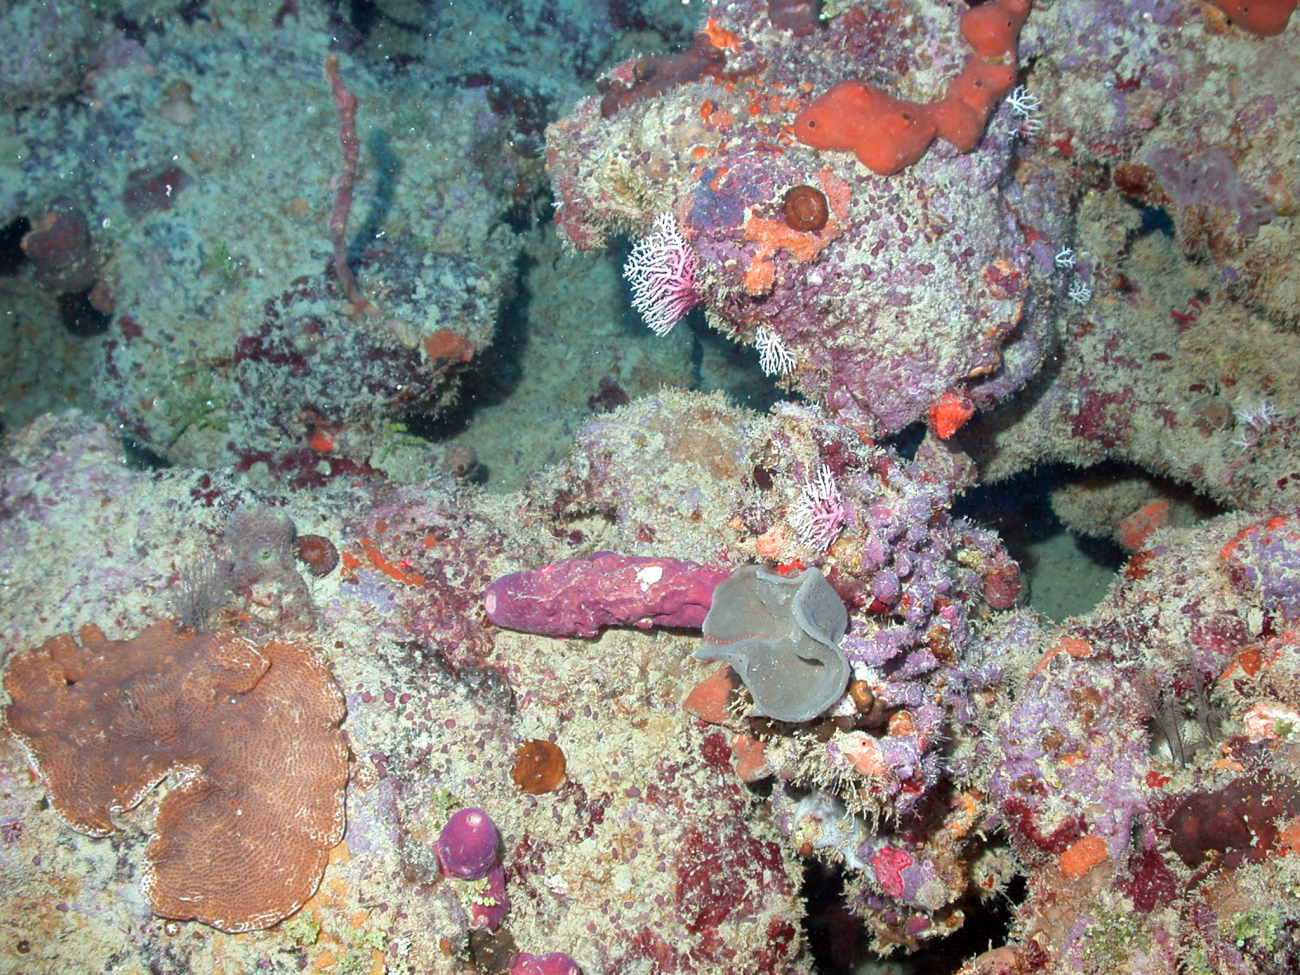 Sponges, plate coral, and stylaster corals (pink and white) on a colorful hardsubstrate